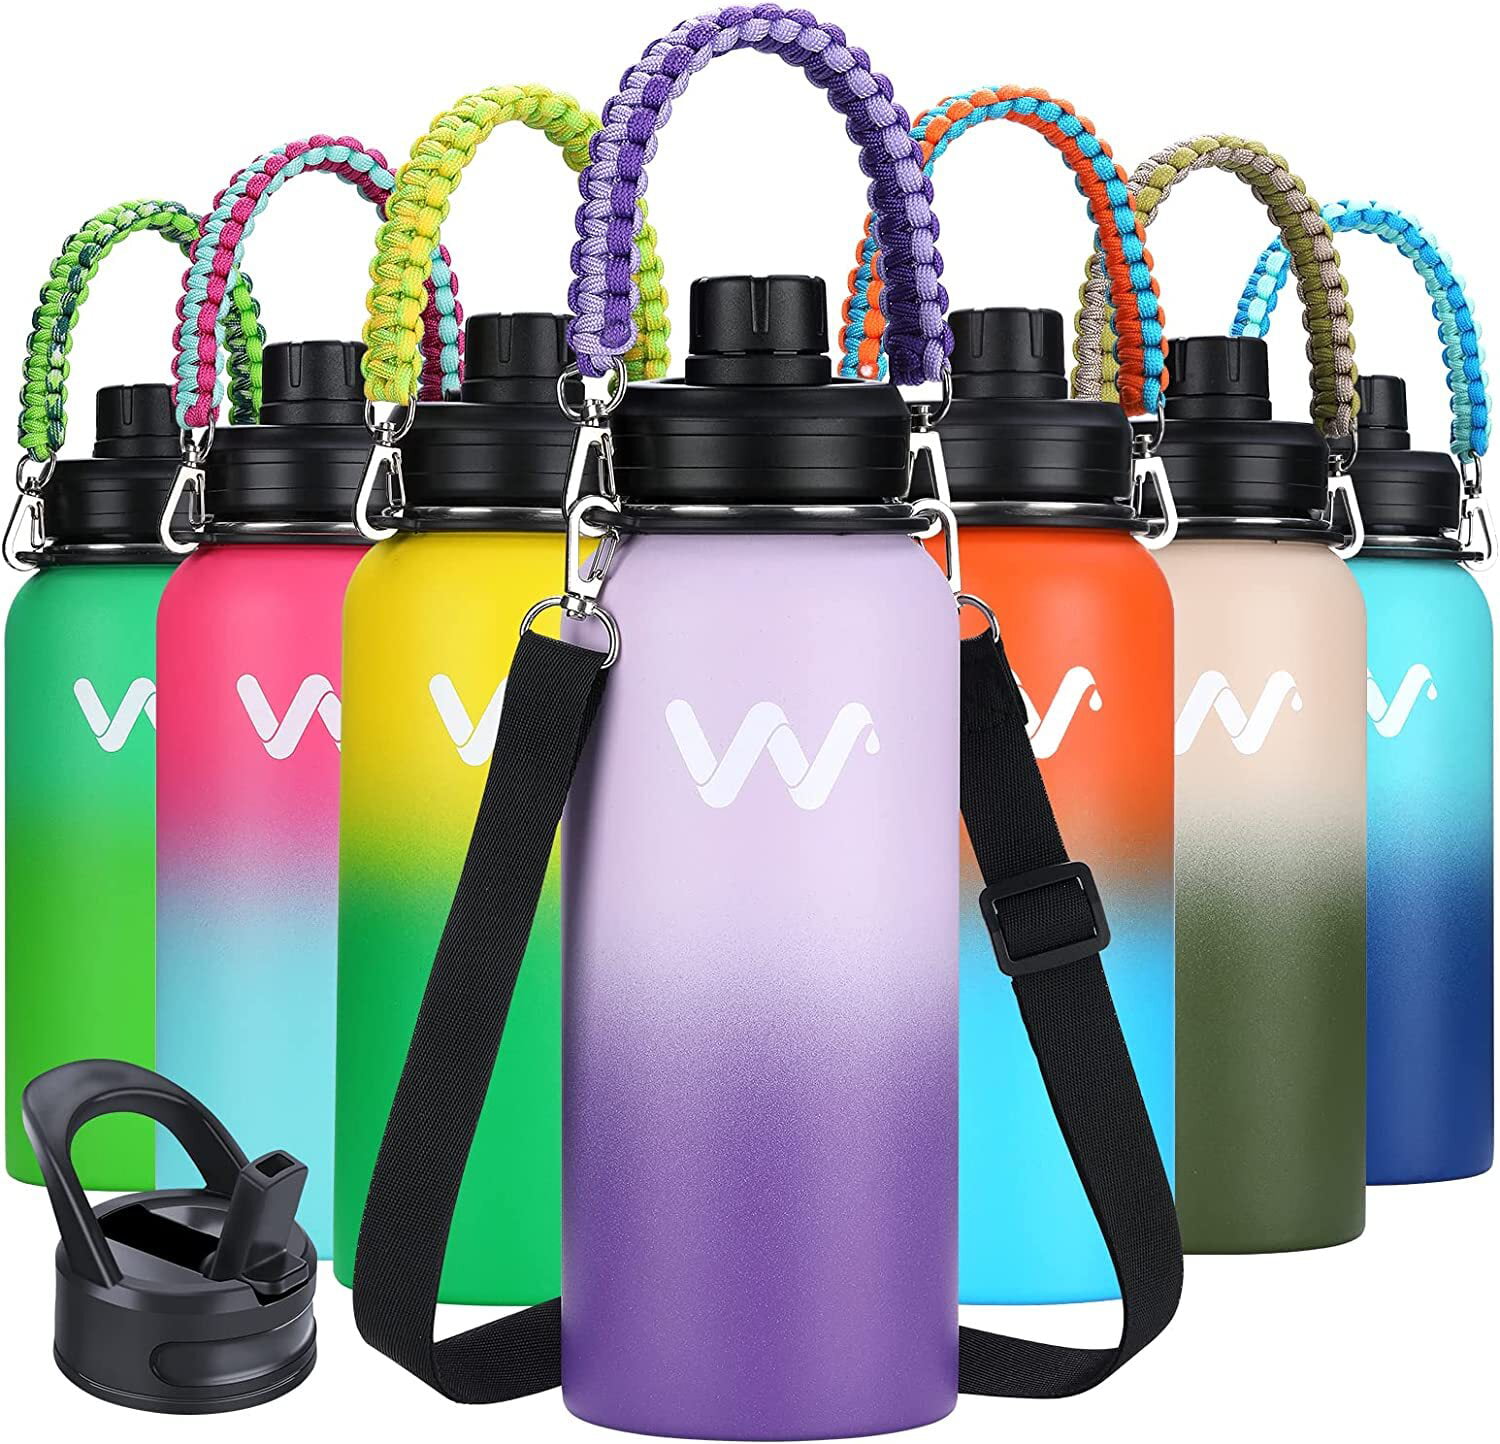 Awesome Insulated Water Bottle With Straw - EverichHydro